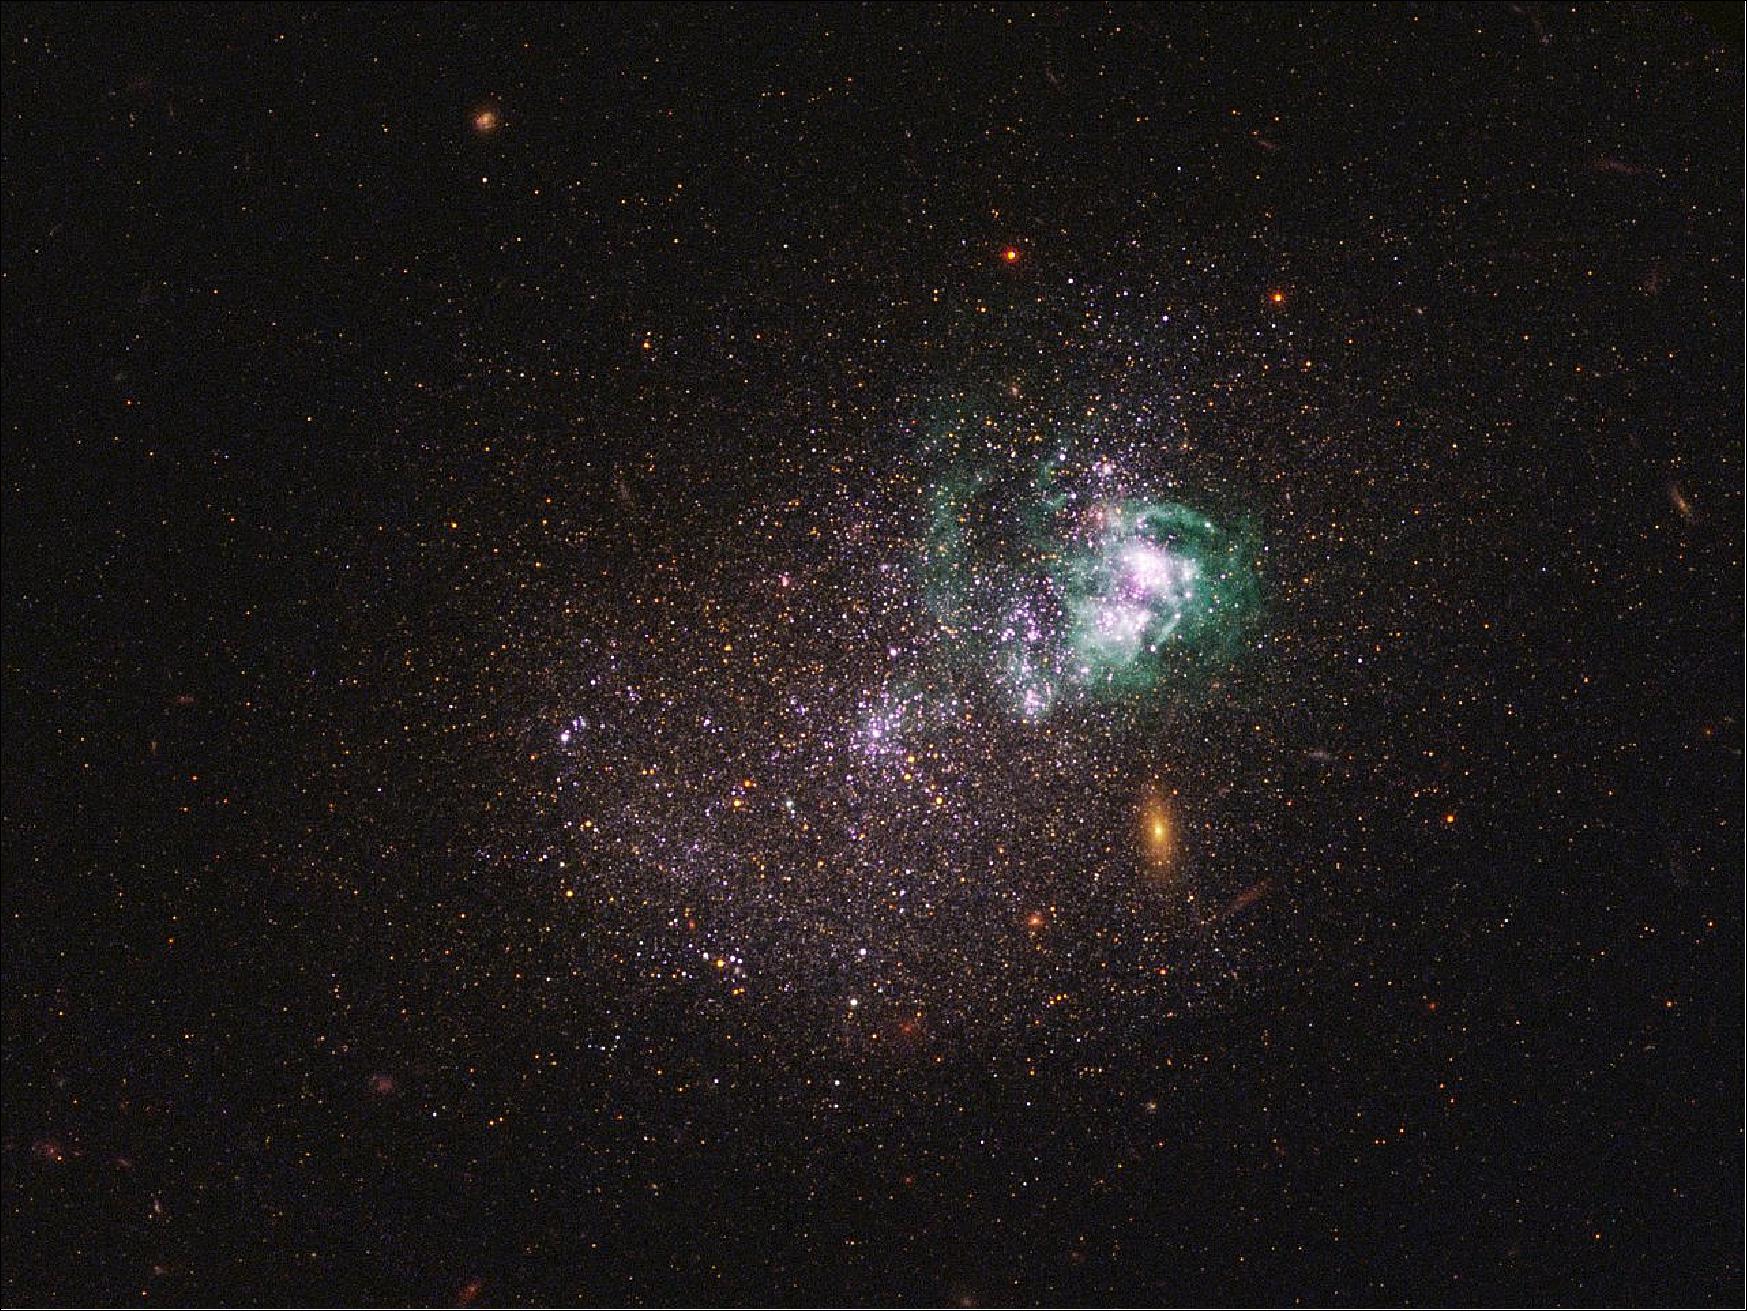 Figure 37: Dwarf galaxy UGCA 281. UGCA 281 is a blue compact dwarf galaxy located in the constellation of Canes Venatici. Within it, two giant star clusters appear brilliant white and are swaddled by greenish hydrogen gas clouds. These clusters are responsible for most of the recent star formation in UGCA 281; the rest of the galaxy is comprised of older stars and appears redder in color. The reddish objects in the background are background galaxies that appear through the diffuse dwarf galaxy. The image is a composite using both ultraviolet light and visible light, gathered with Hubble's Wide Field Camera 3 and Advanced Camera for Surveys (image credit: NASA, ESA, and the LEGUS team)